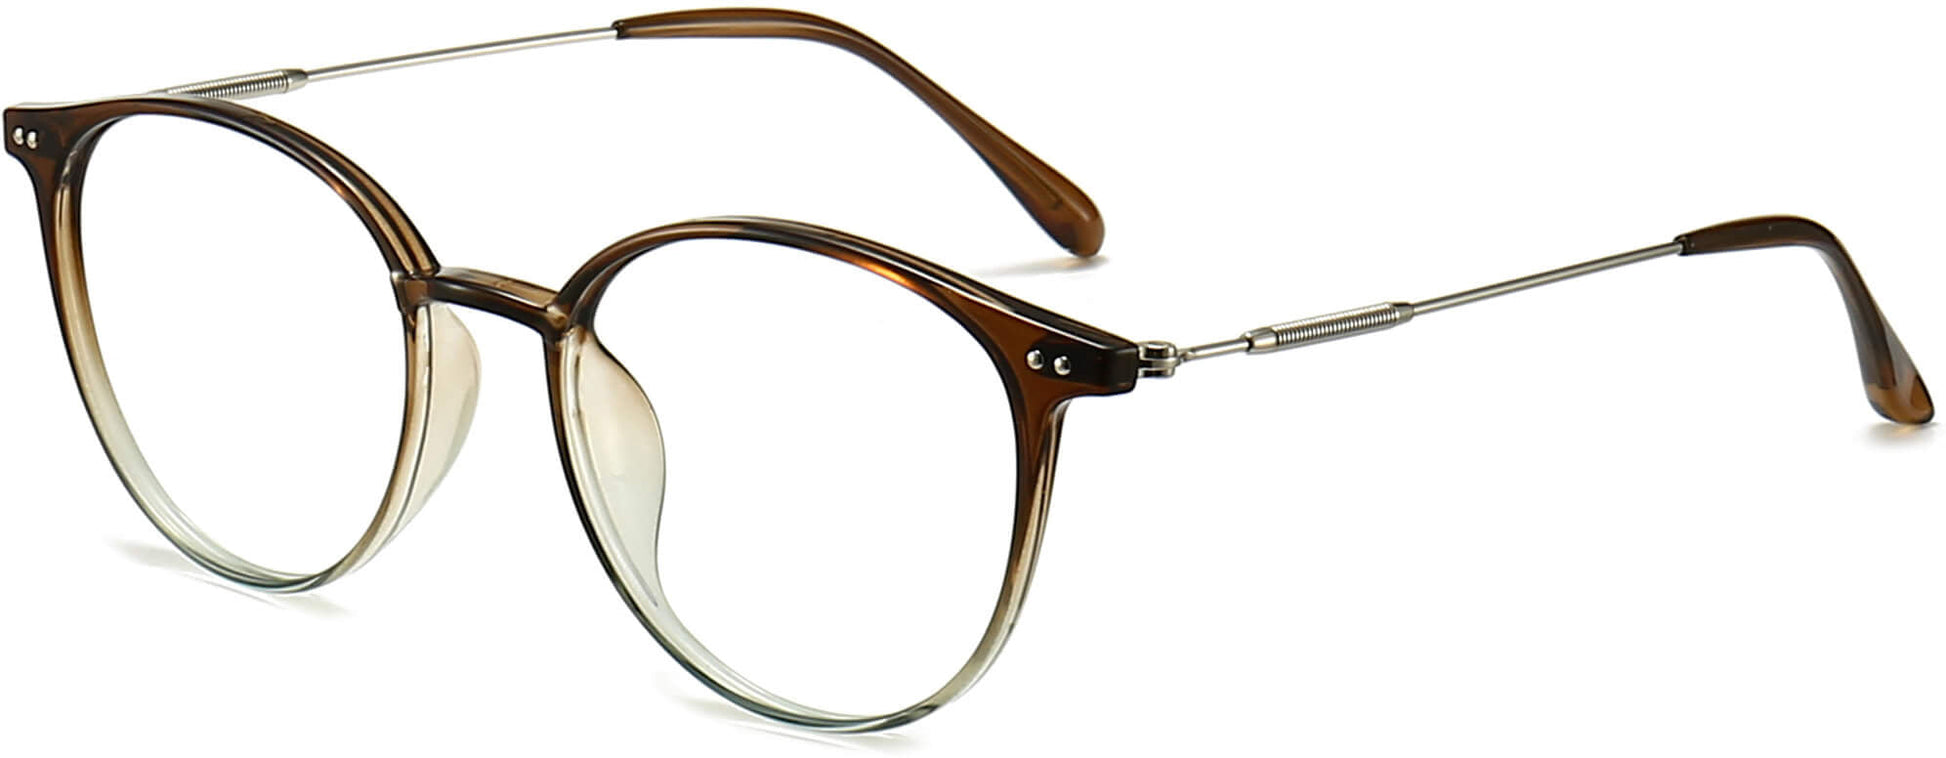 Rhea Round Brown Eyeglasses from ANRRI, angle view